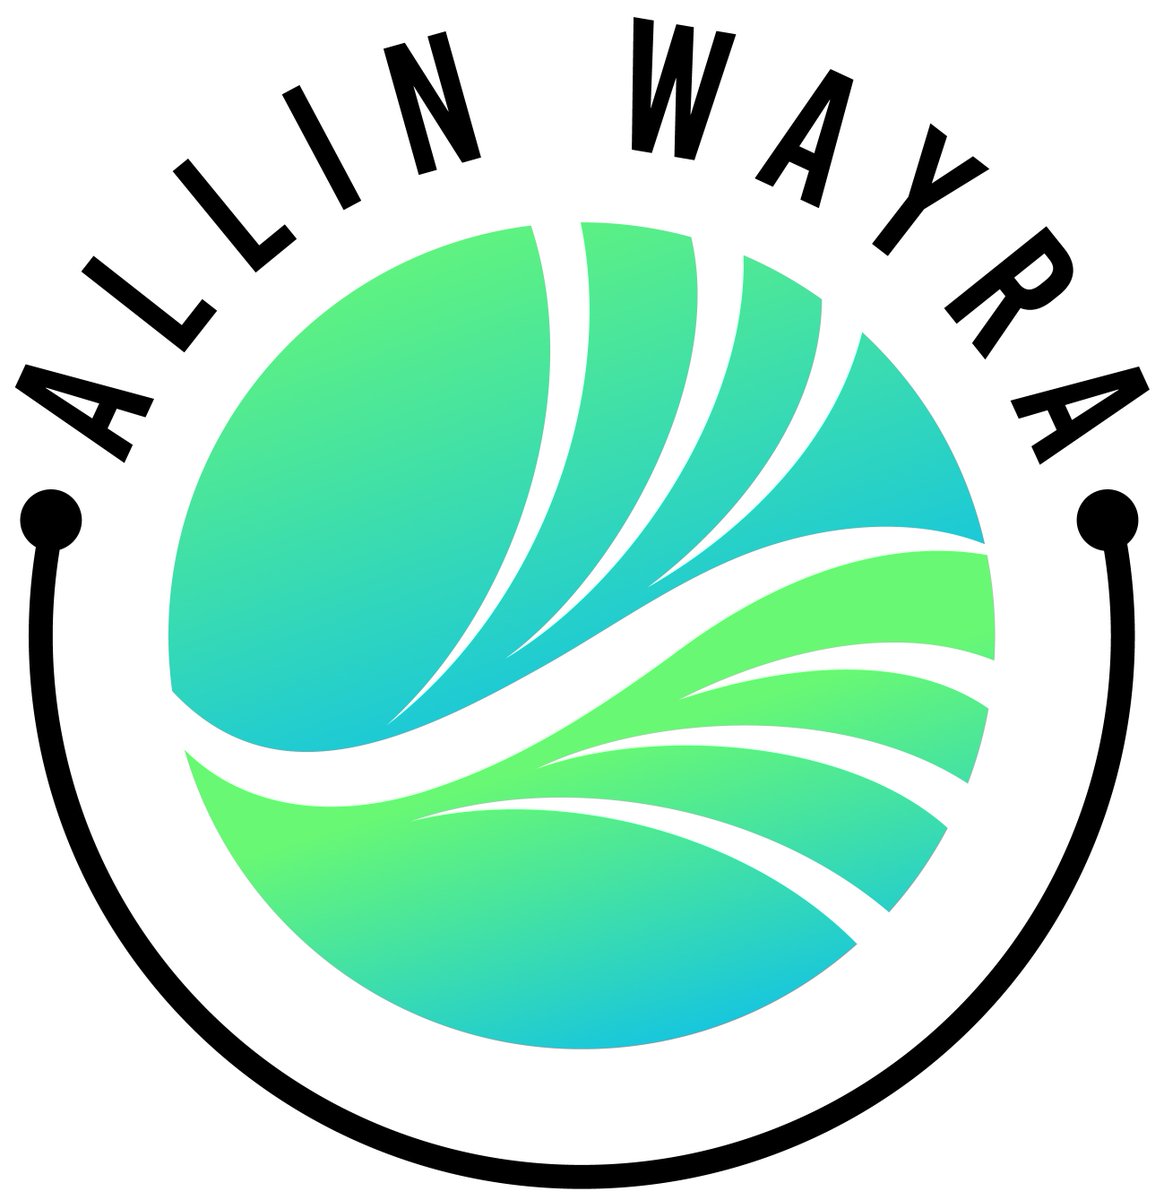 Introducing #AllinWayra, our new @IGACProject Activity on #airpolluton #sensors for #AtmosphericScience #research.
We aim to build a #diverse #global #community fostering  environmental justice. 

Join us! 
igacproject.org/activities/all…